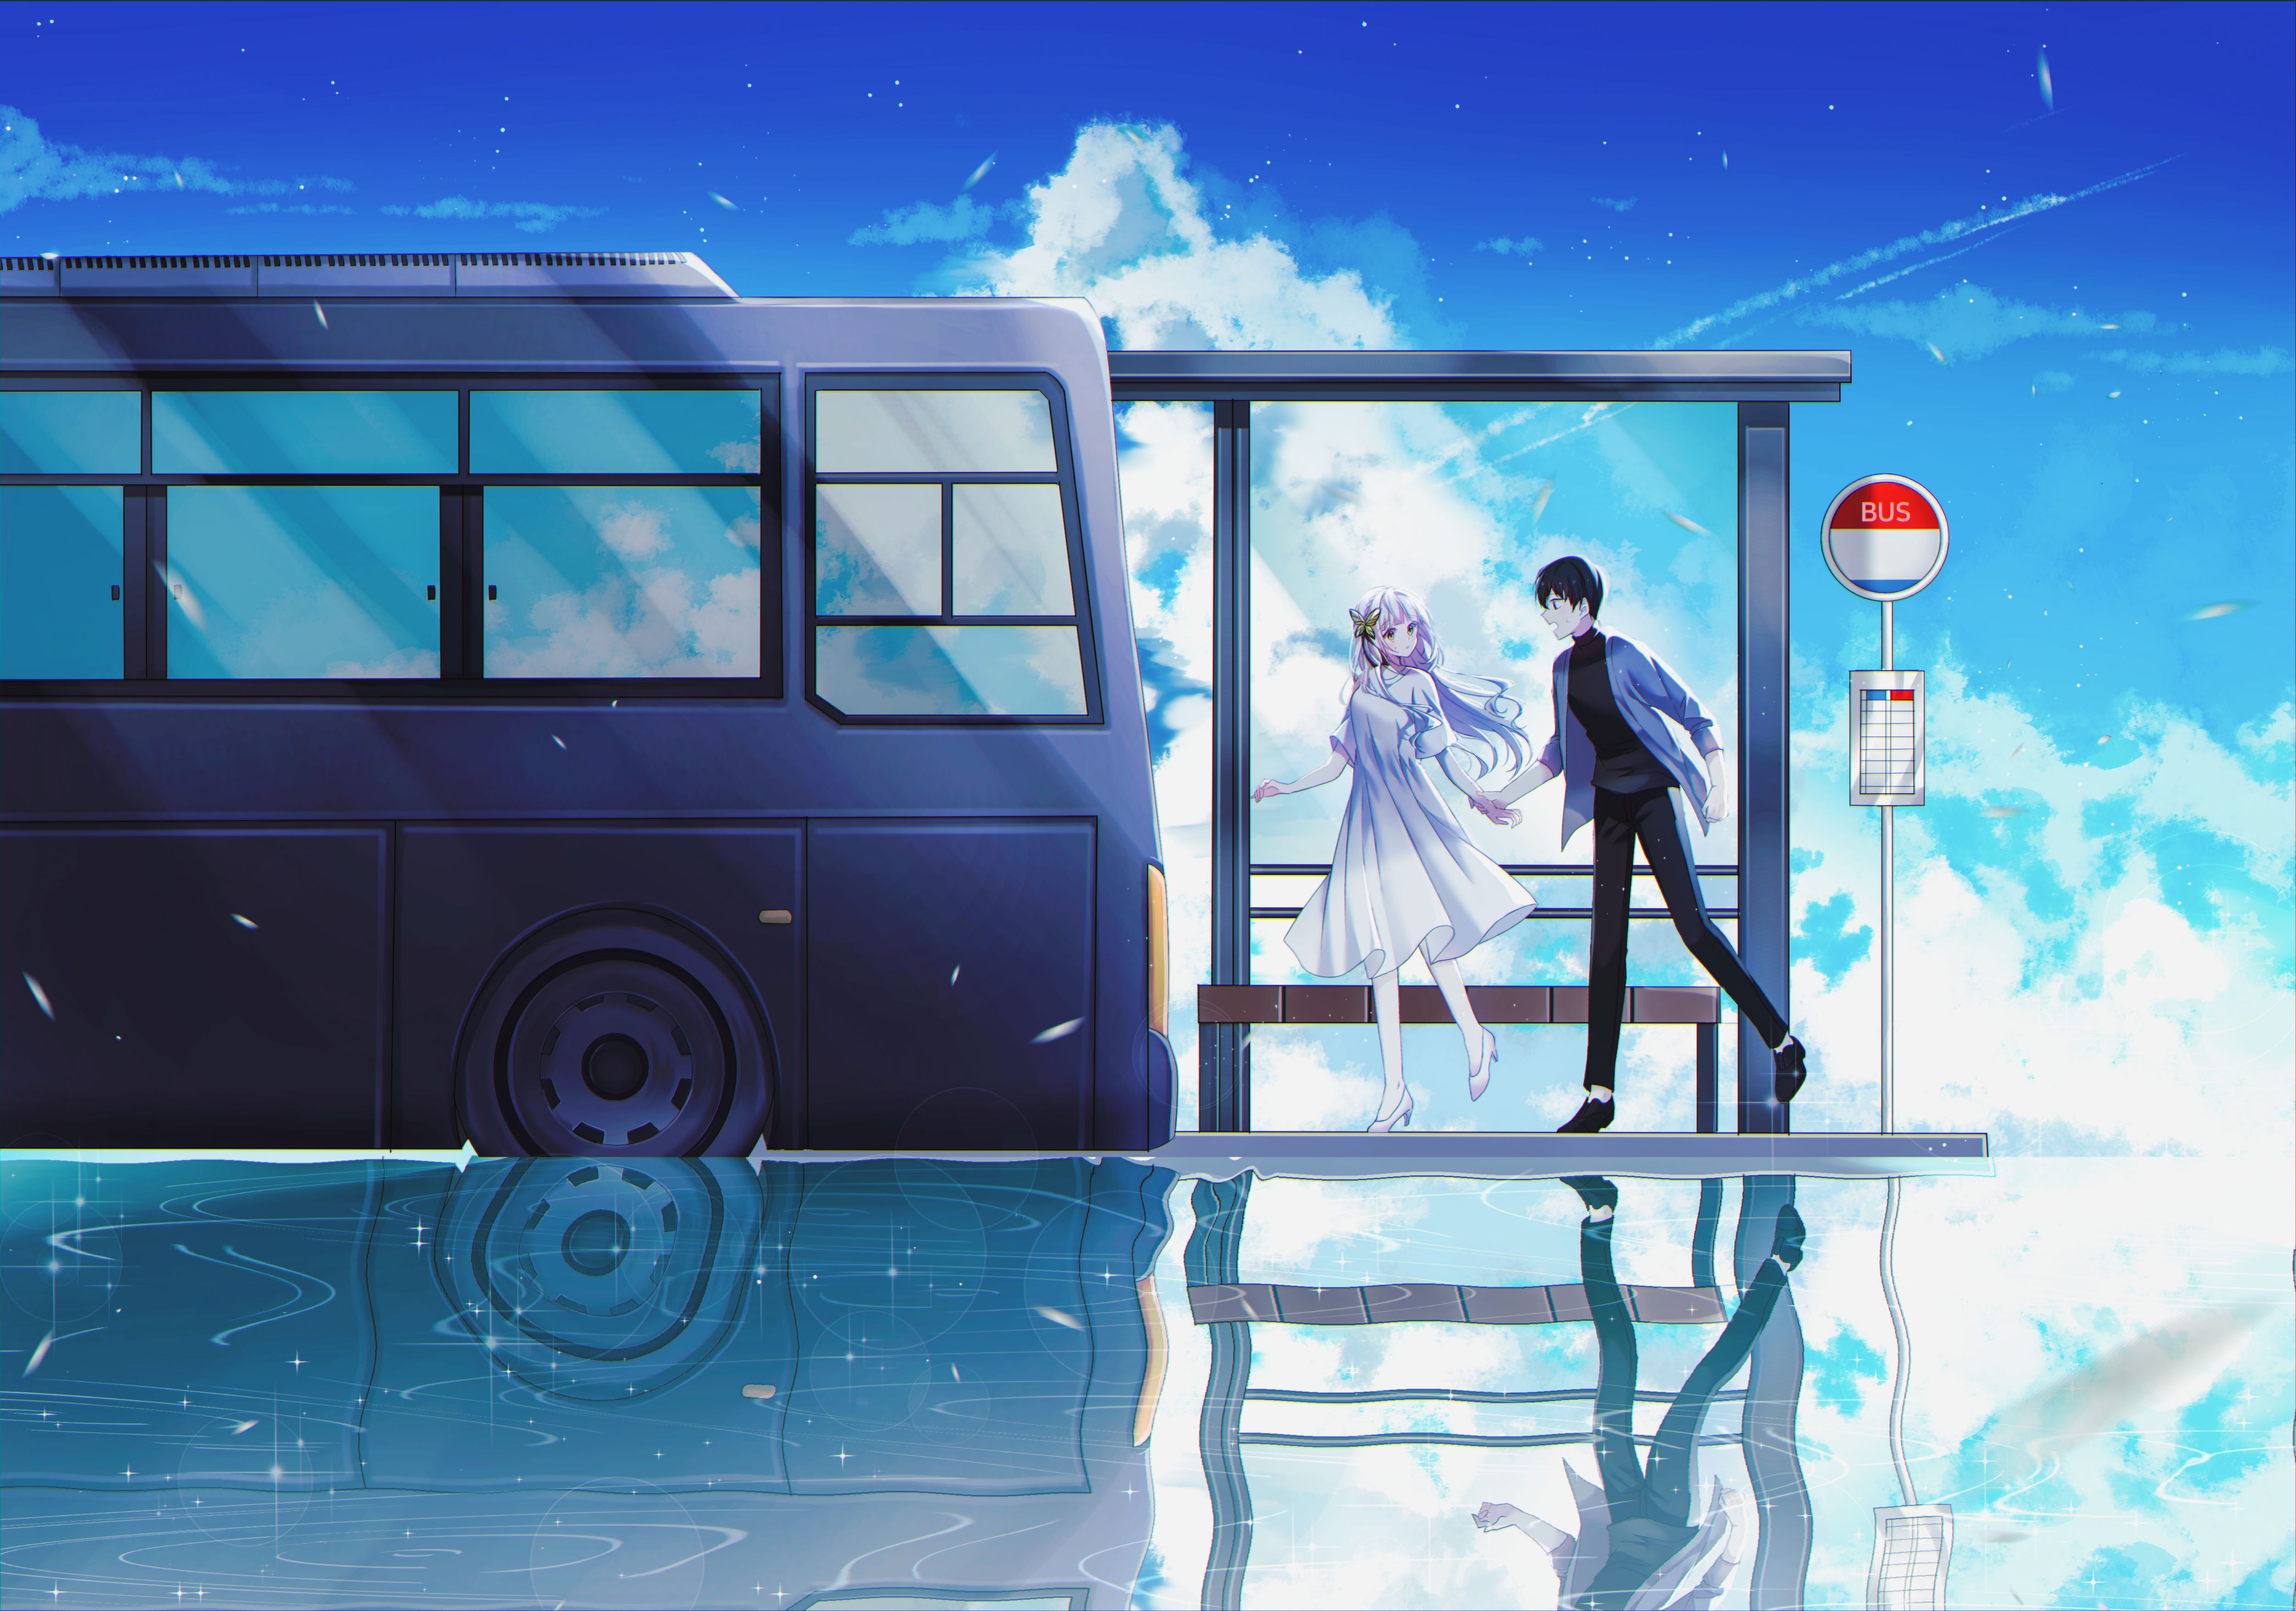 Wallpaper : 1920x1080 px, anime, buses, clouds, Everlasting Summer, people,  shadow 1920x1080 - wallhaven - 1262031 - HD Wallpapers - WallHere